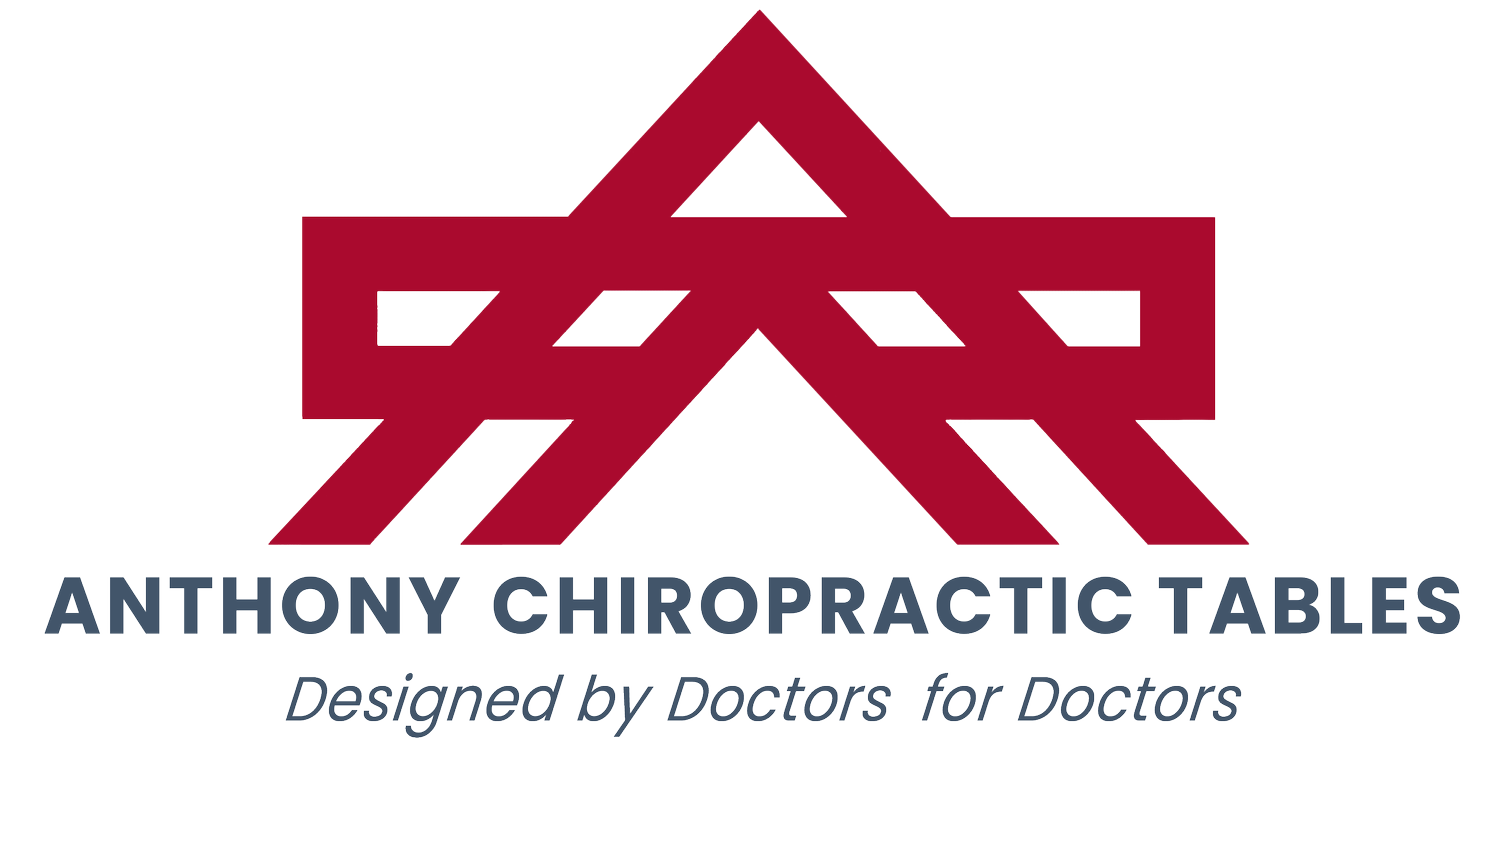 ANTHONY CHIROPRACTIC TABLES